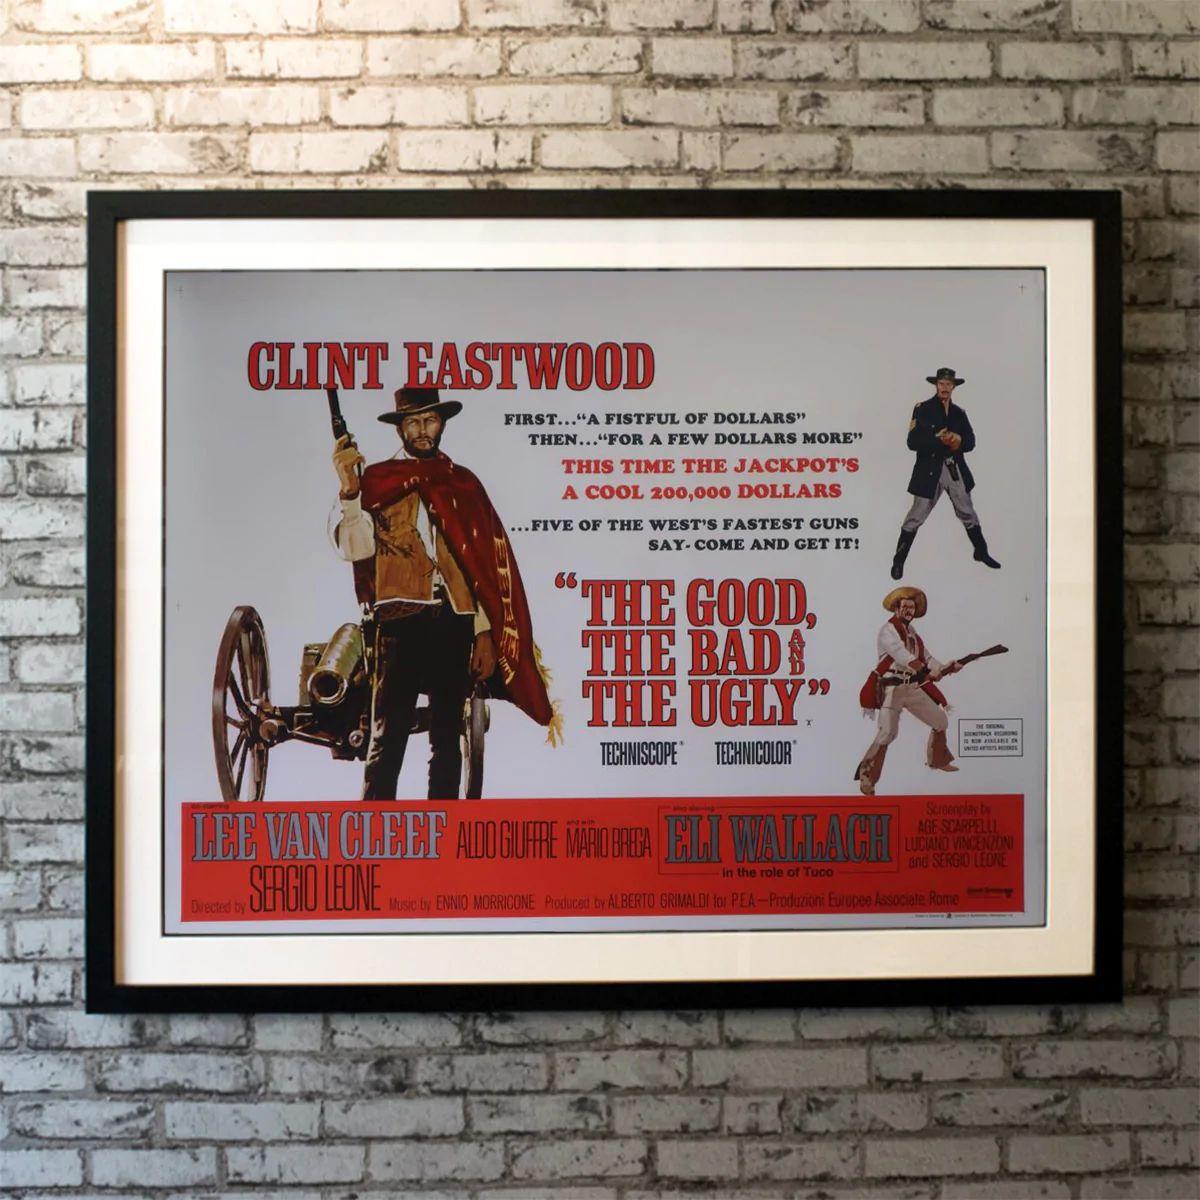 The Good, The Bad And The Ugly, Unframed Poster, 1966

Original British Quad (30 X 40 Inches). A bounty hunting scam joins two men in an uneasy alliance against a third in a race to find a fortune in gold buried in a remote cemetery.

Year: